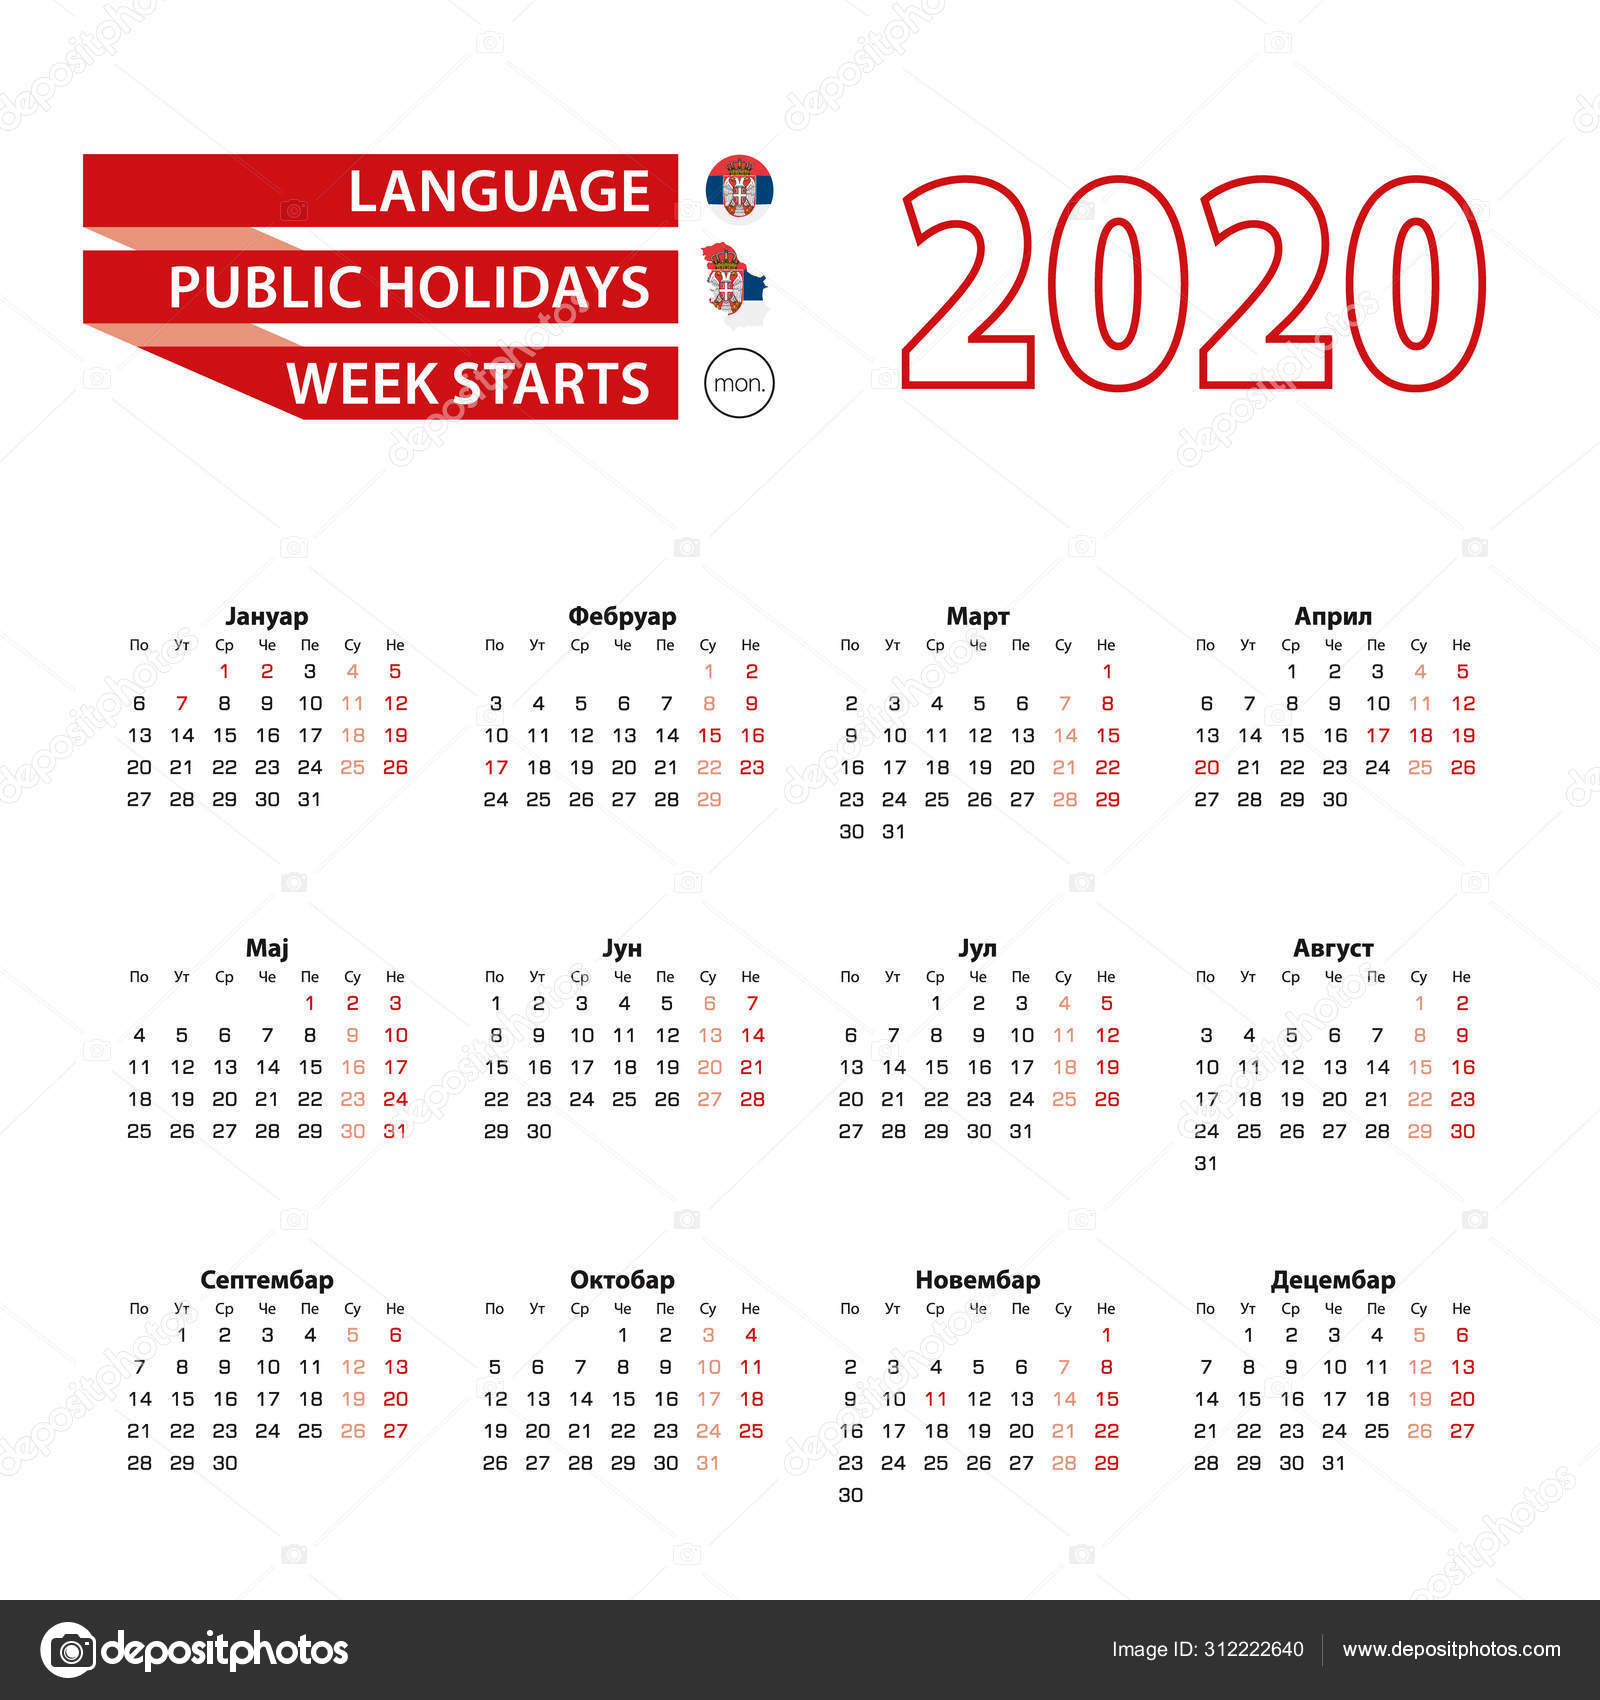 Calendar 2020 In Serbian Language With Public Holidays The